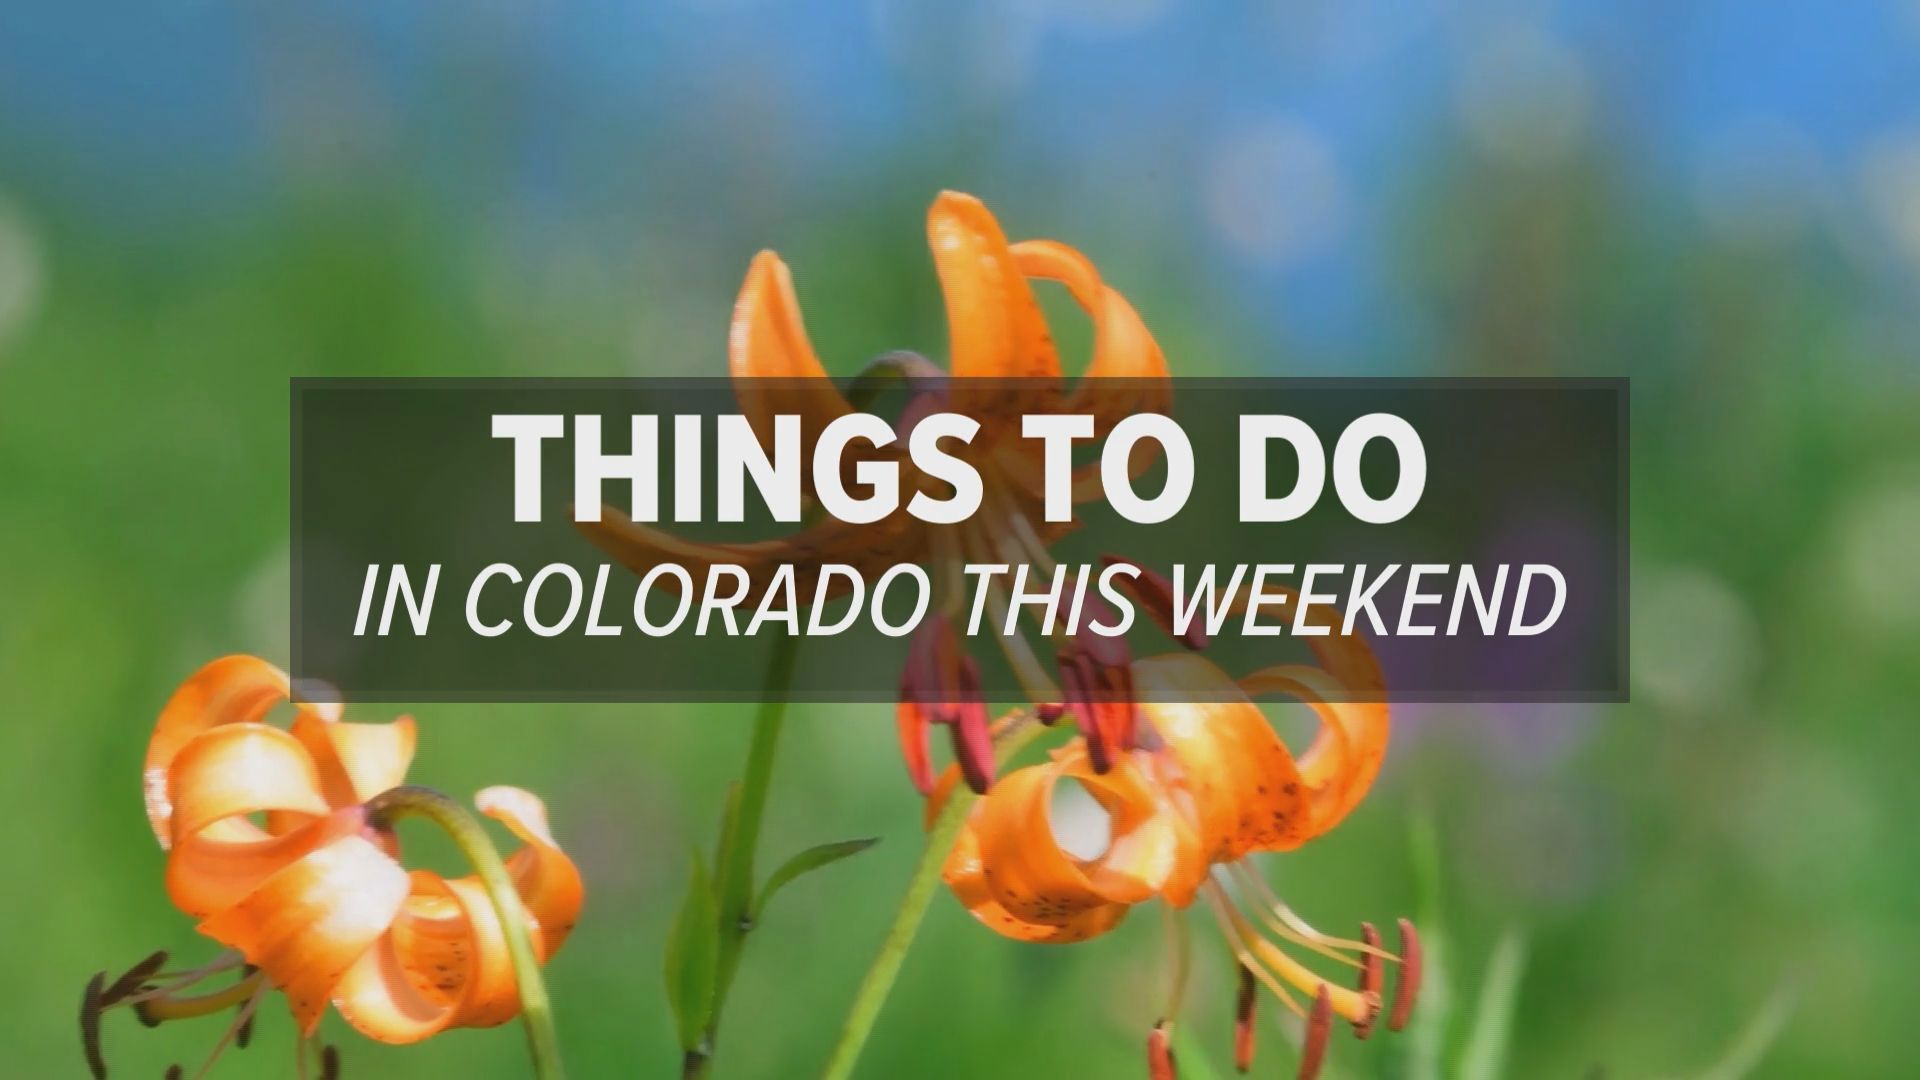 Cat, art, tattoo, and wood-carving festivals, concerts and live events are planned throughout Colorado this July weekend.